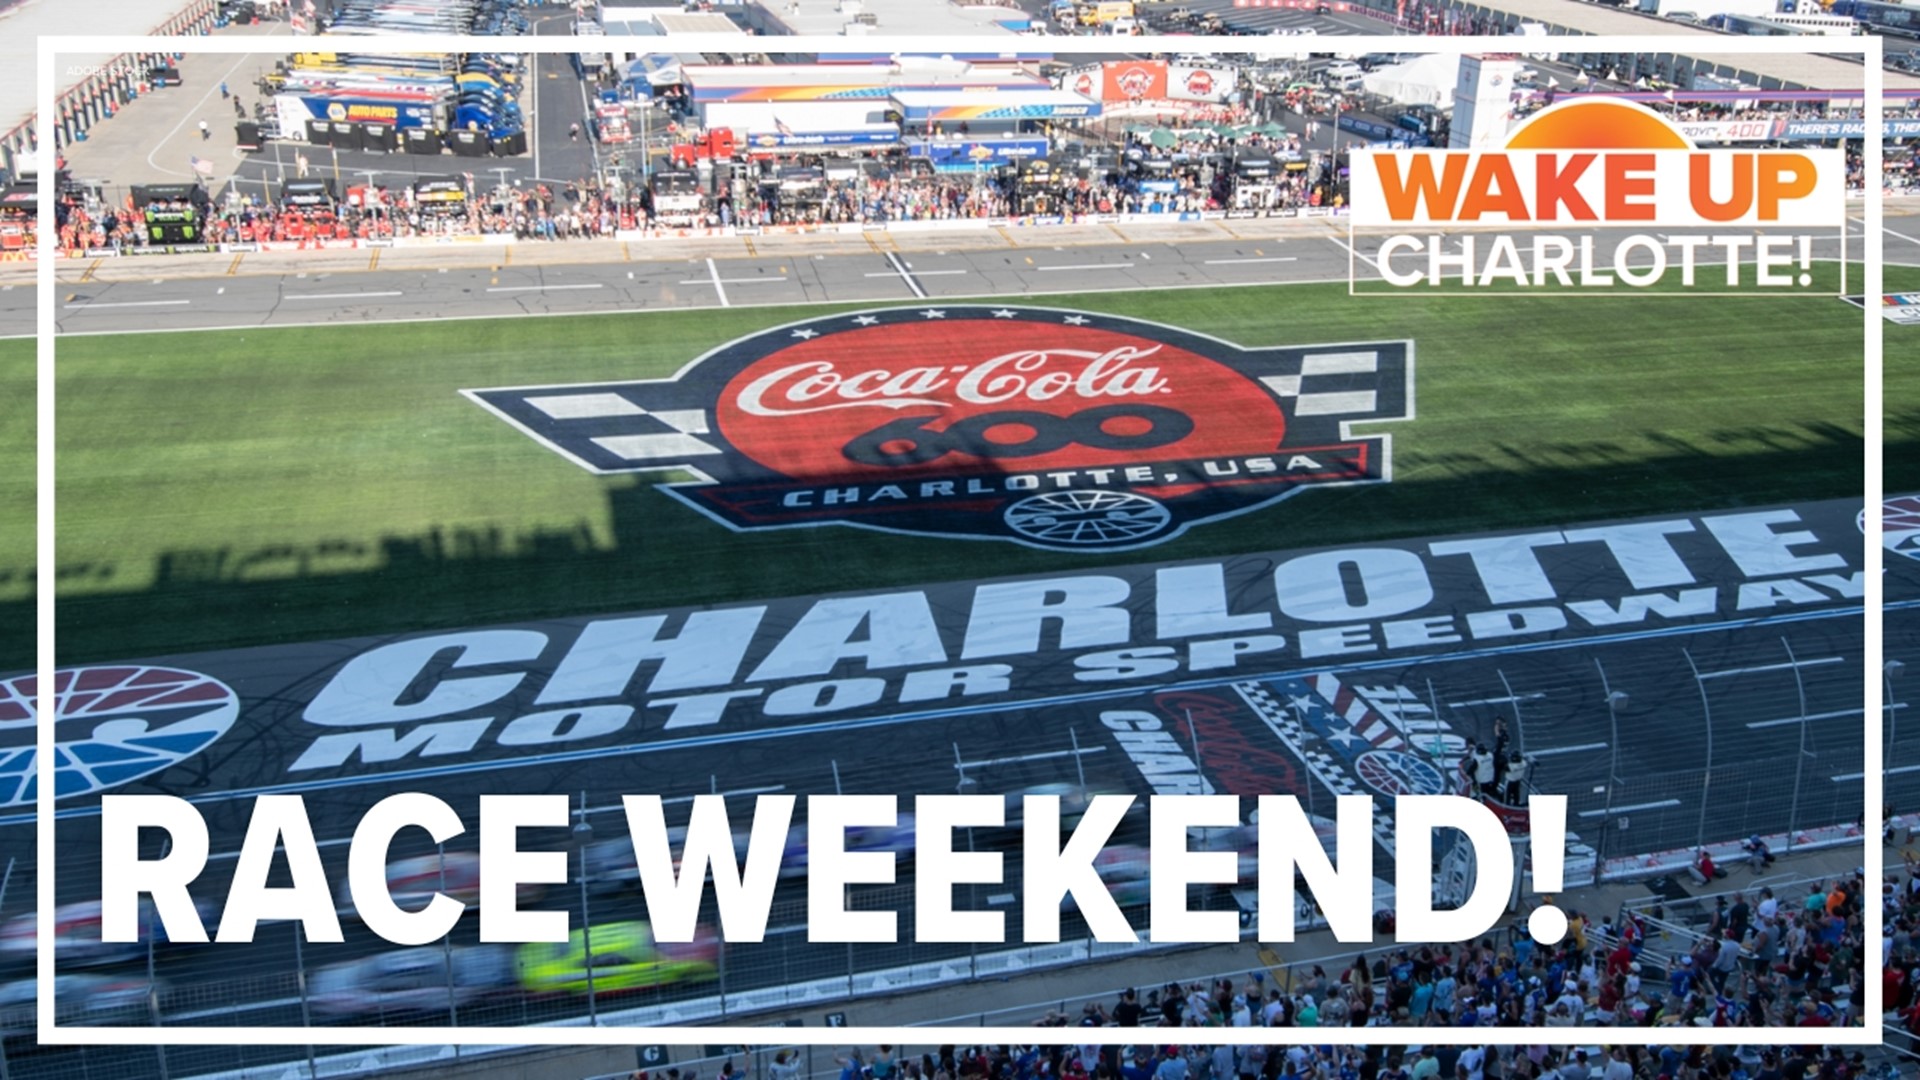 Charlotte Motor Speedway announced all reserved grandstand tickets for the Coca-Cola 600 are sold out as the track prepares for a huge Memorial Day crowd.